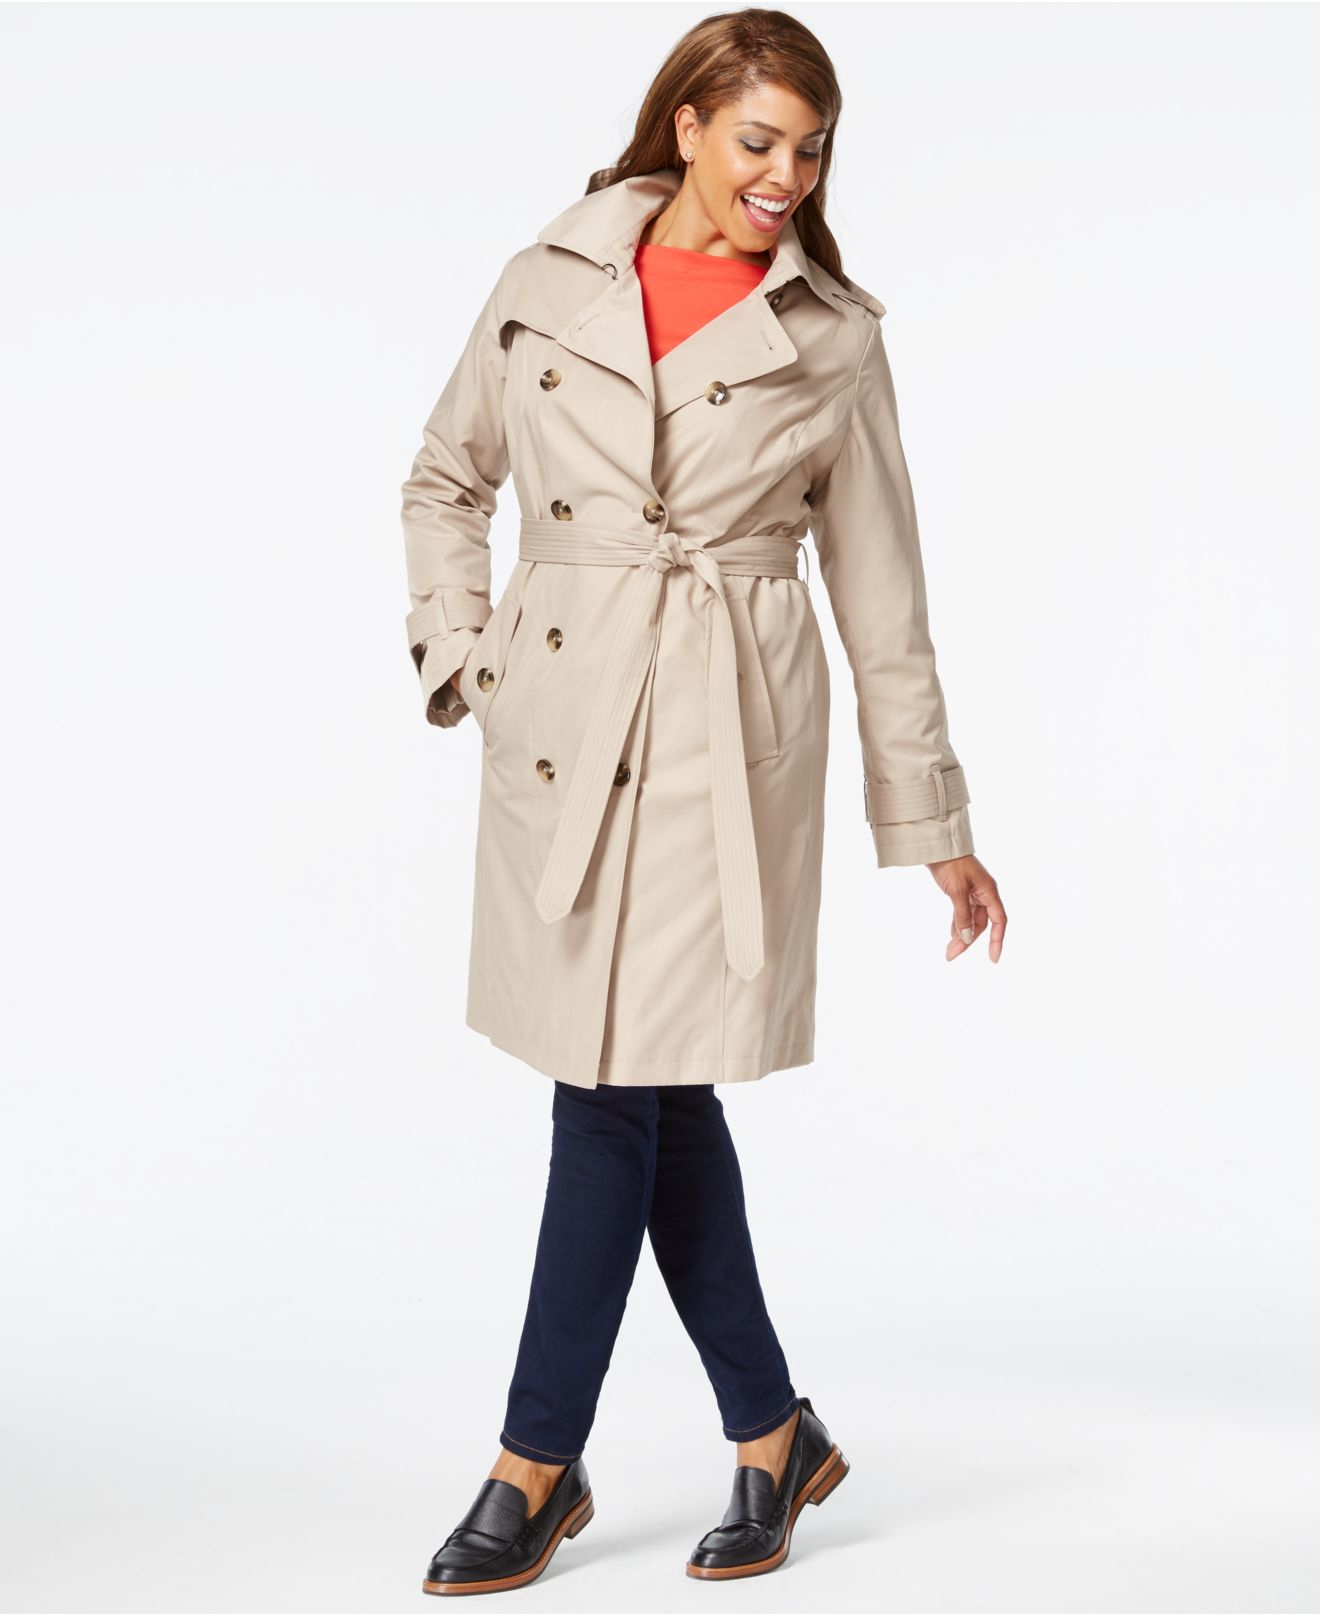 Lyst - London Fog Plus Size Hooded Trench Coat in Natural